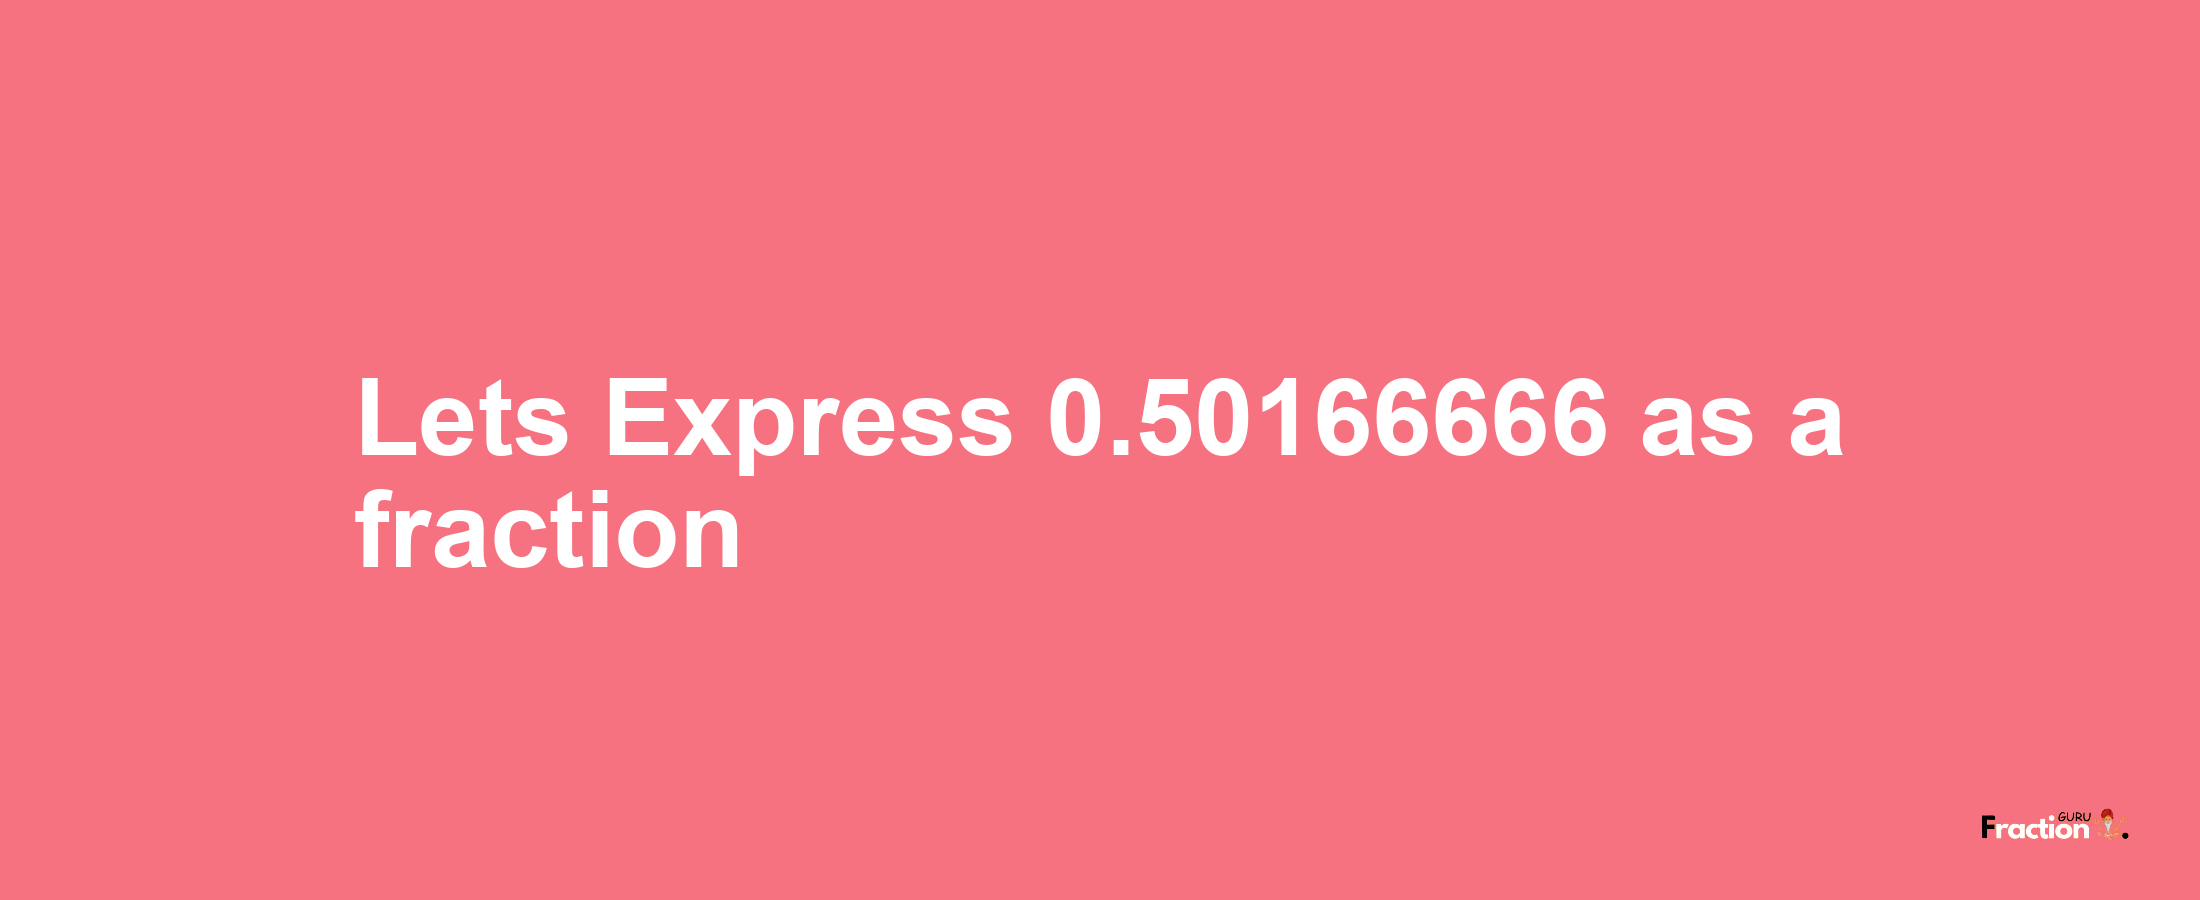 Lets Express 0.50166666 as afraction